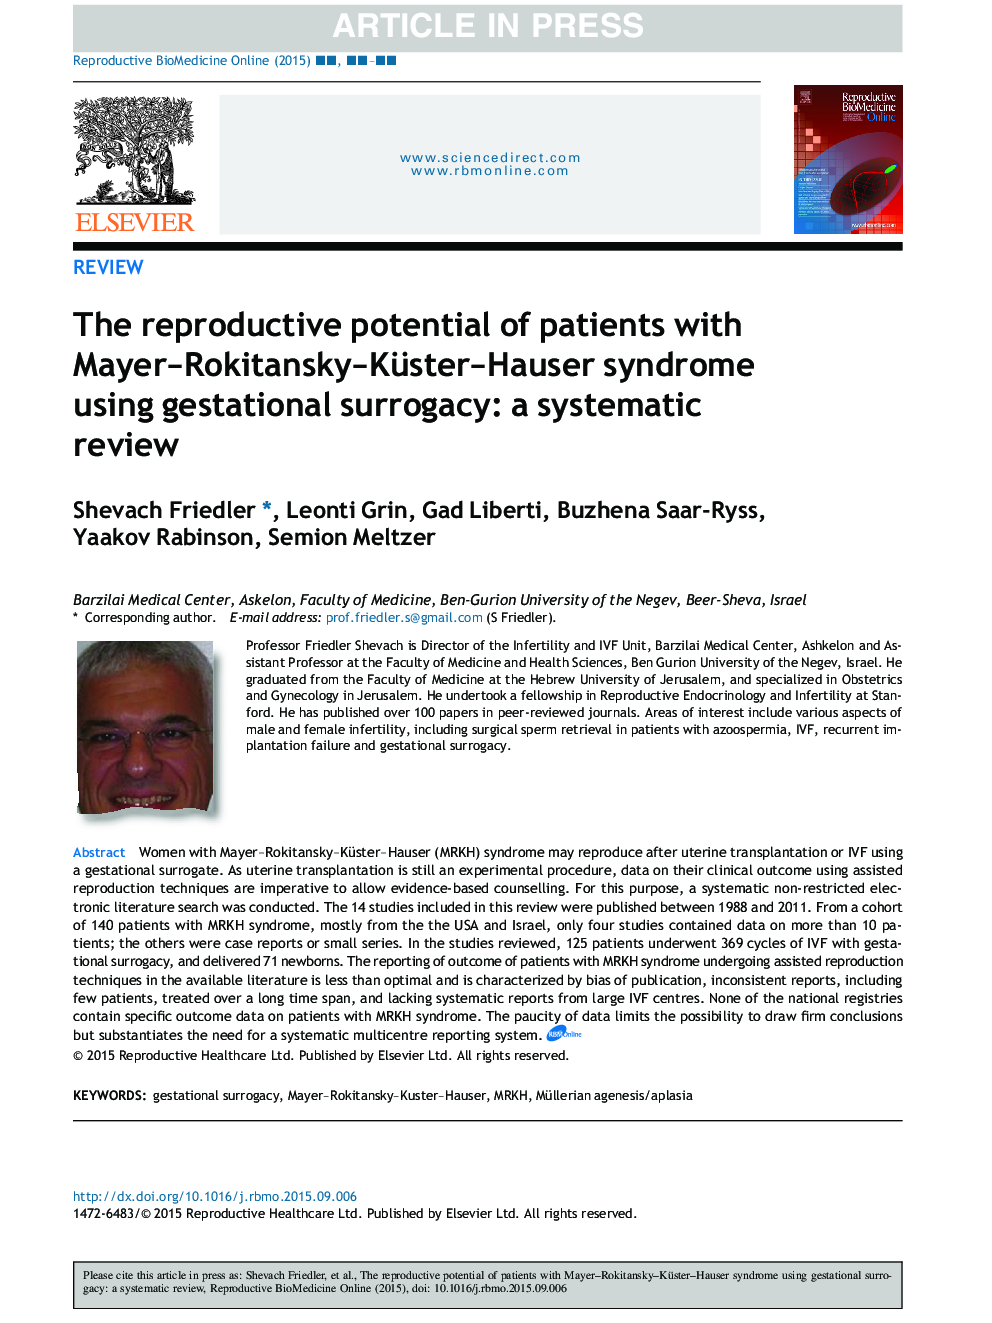 The reproductive potential of patients with Mayer-Rokitansky-Küster-Hauser syndrome using gestational surrogacy: a systematic review